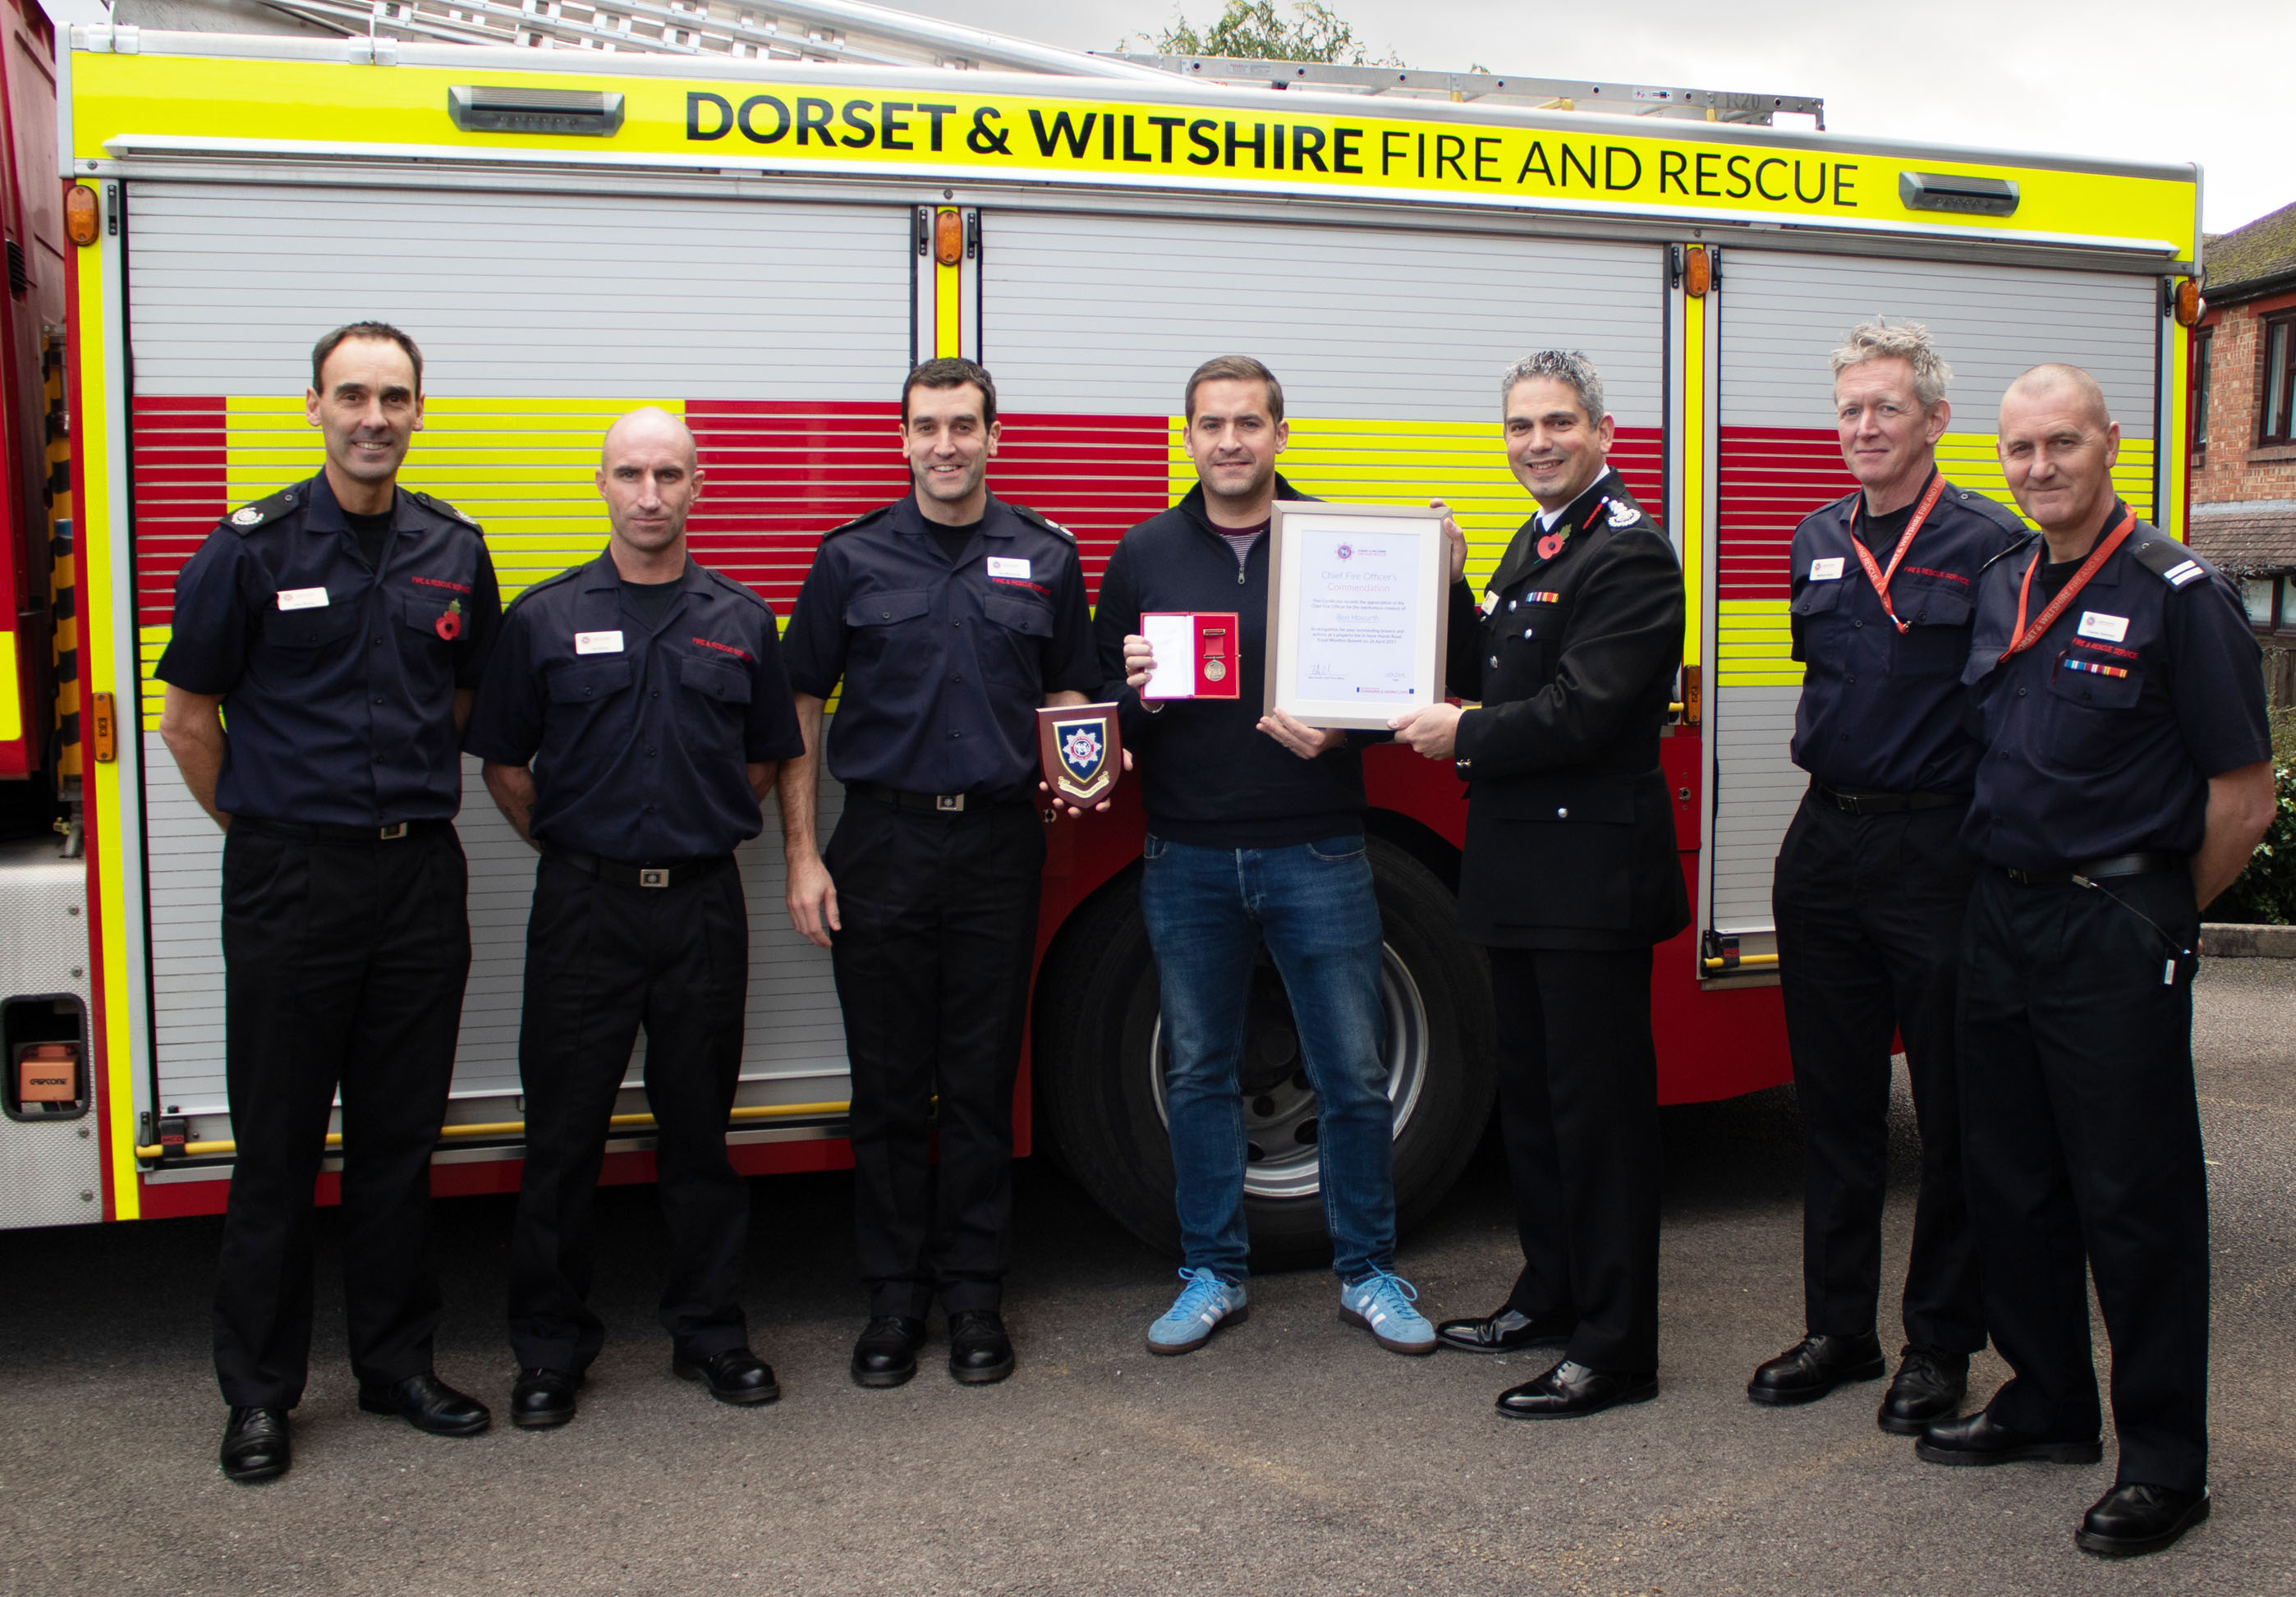 Chief Fire Officer Ben Ansell presents commendation and medal to Ben Howarth in front of the Royal Wootton Bassett fire crew